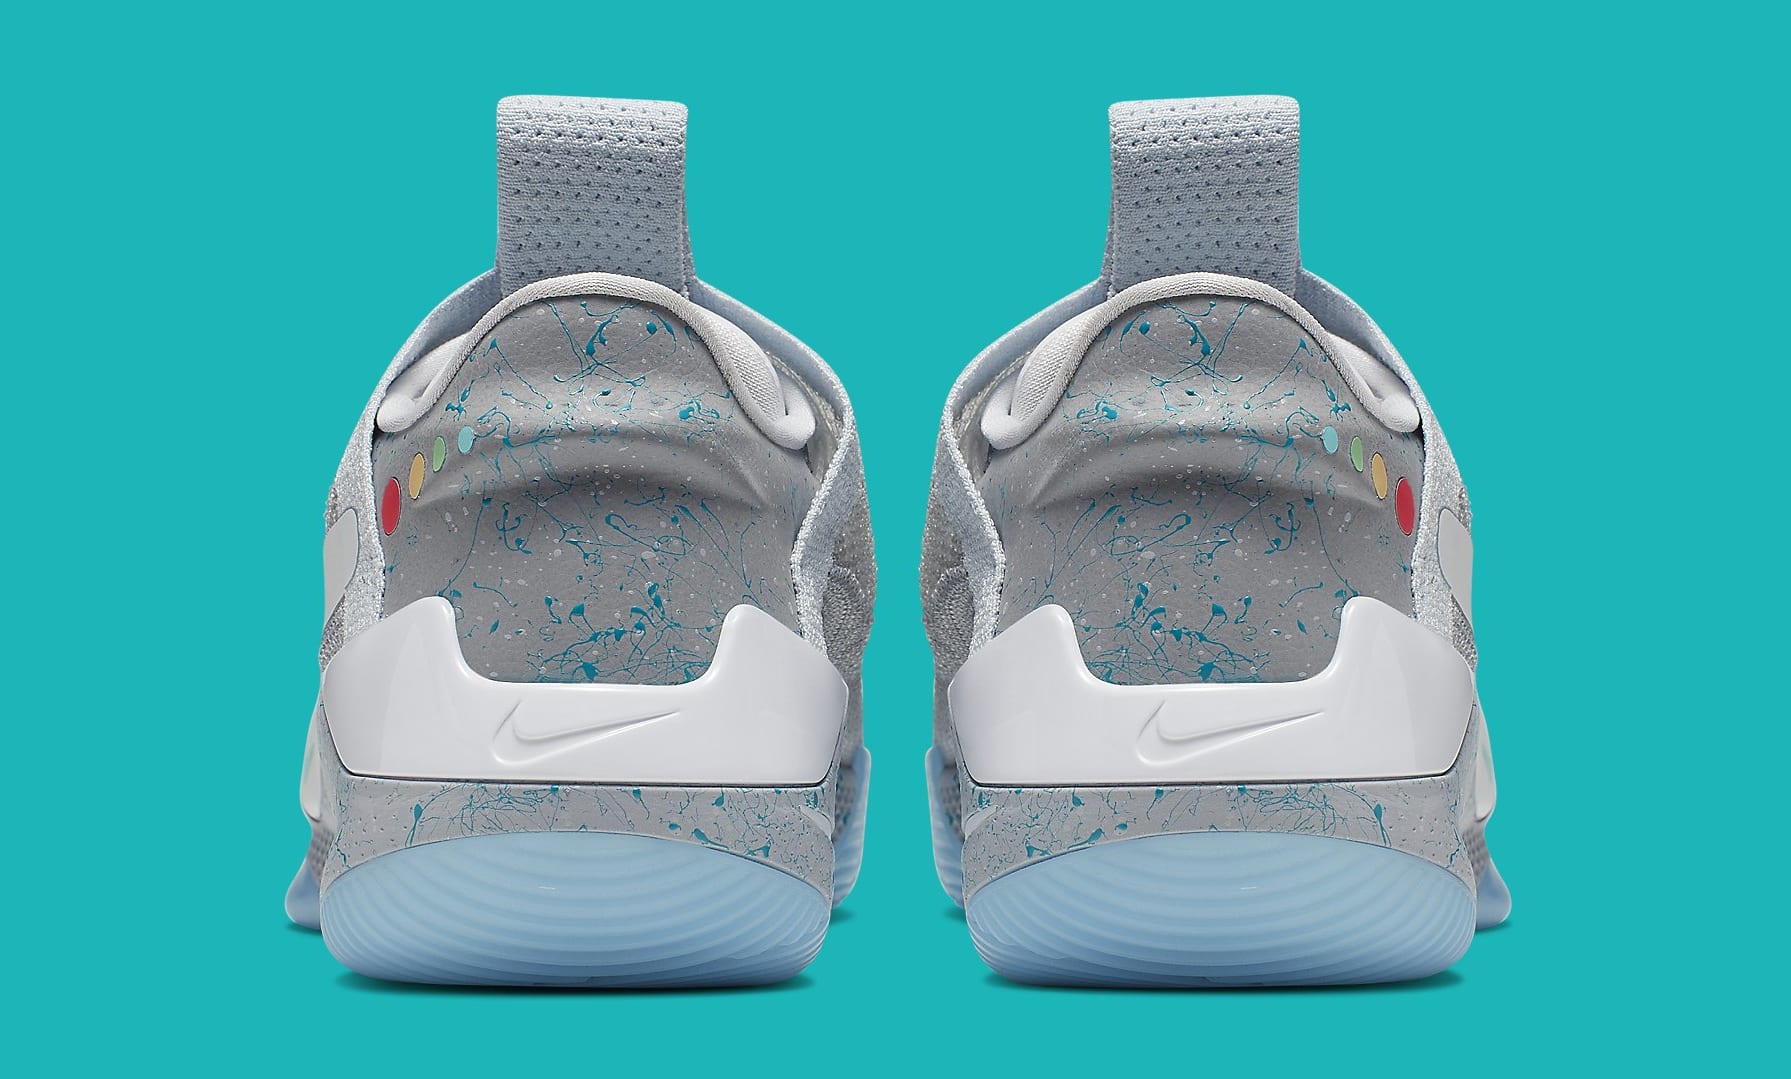 Nike Adapt BB Pays Homage To The Mag With New Colorway: Photos